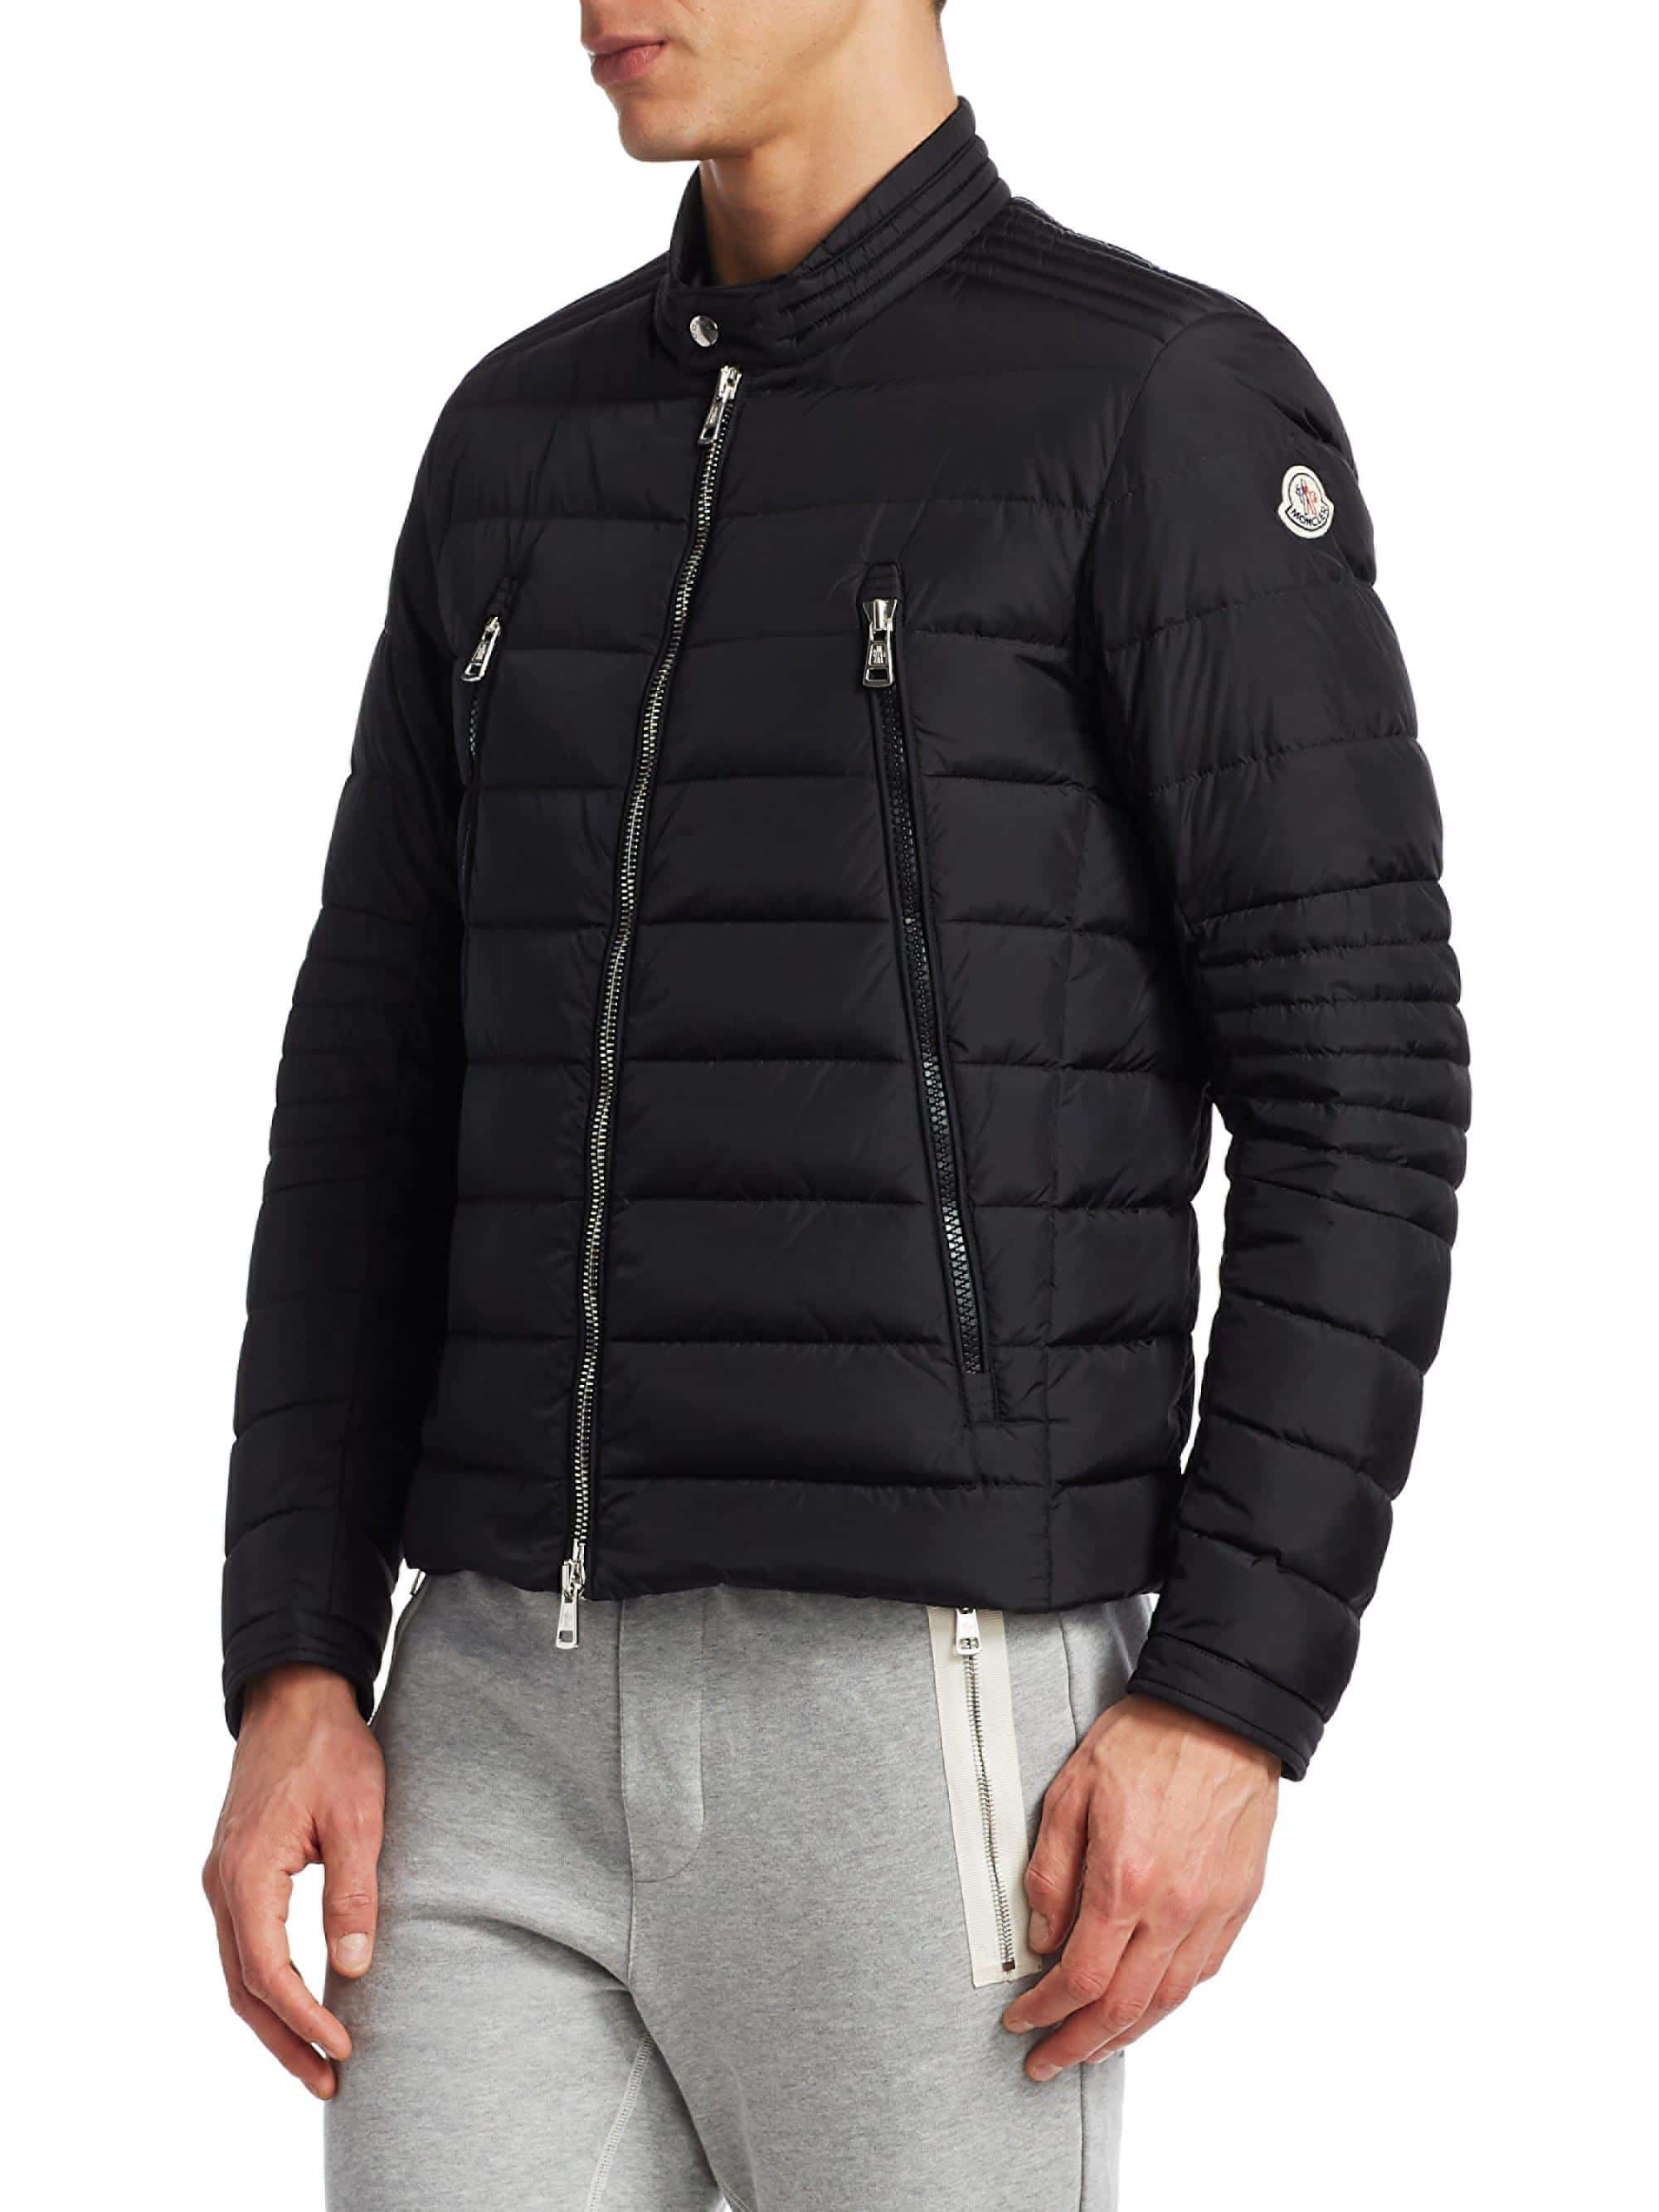 Moncler Jacket with Lampo zippers